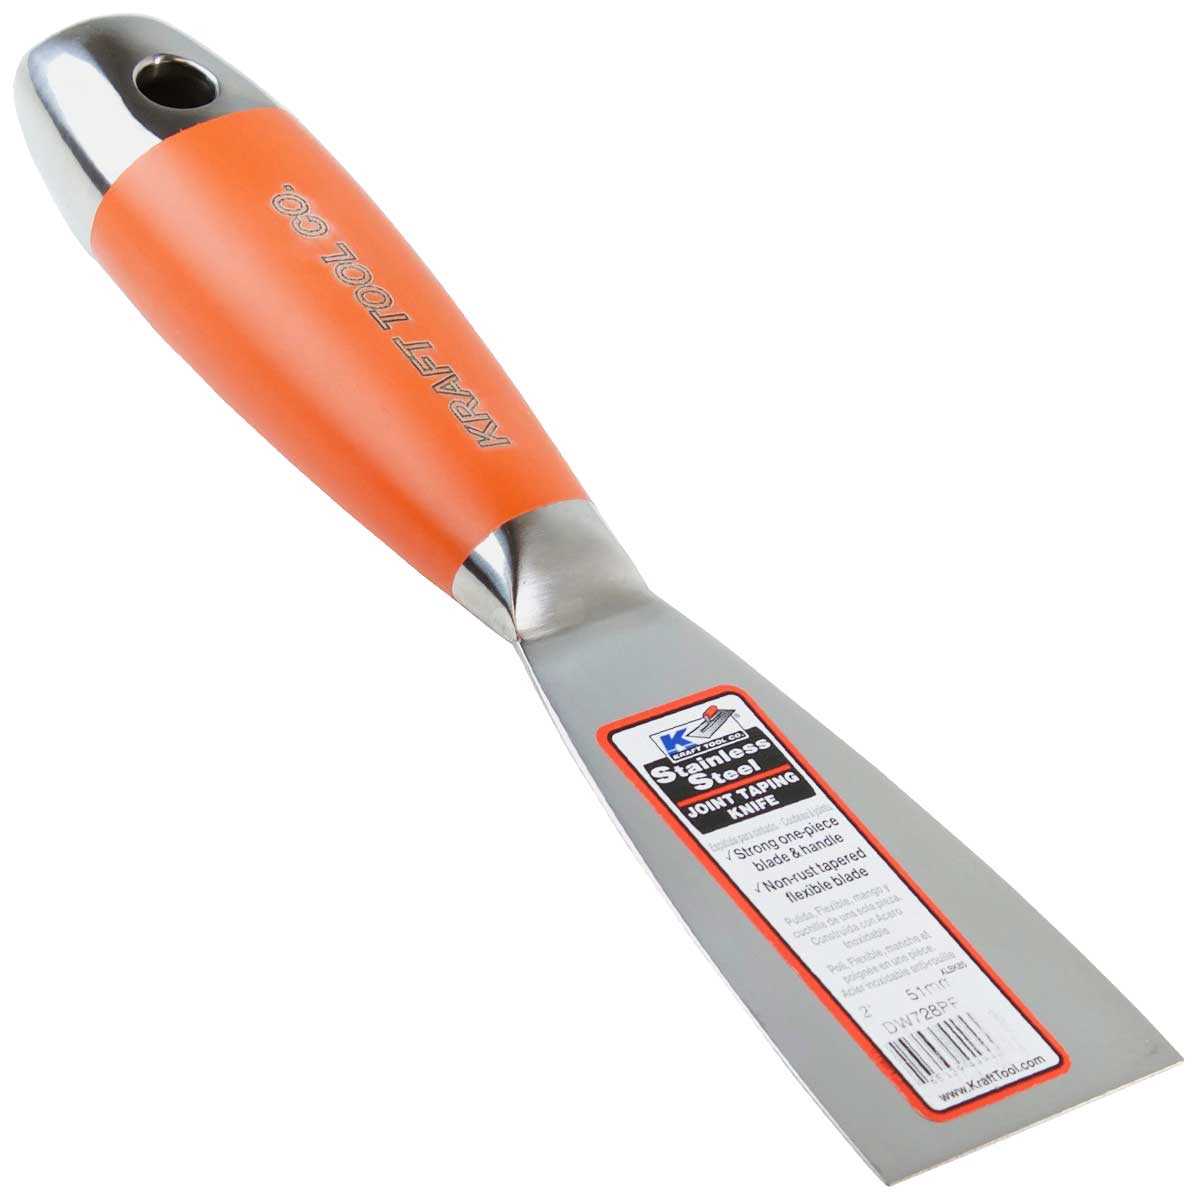 Grip Tight Tools Soft Grip 10 In 1 Painting Tool - Stainless Steel (S0916)